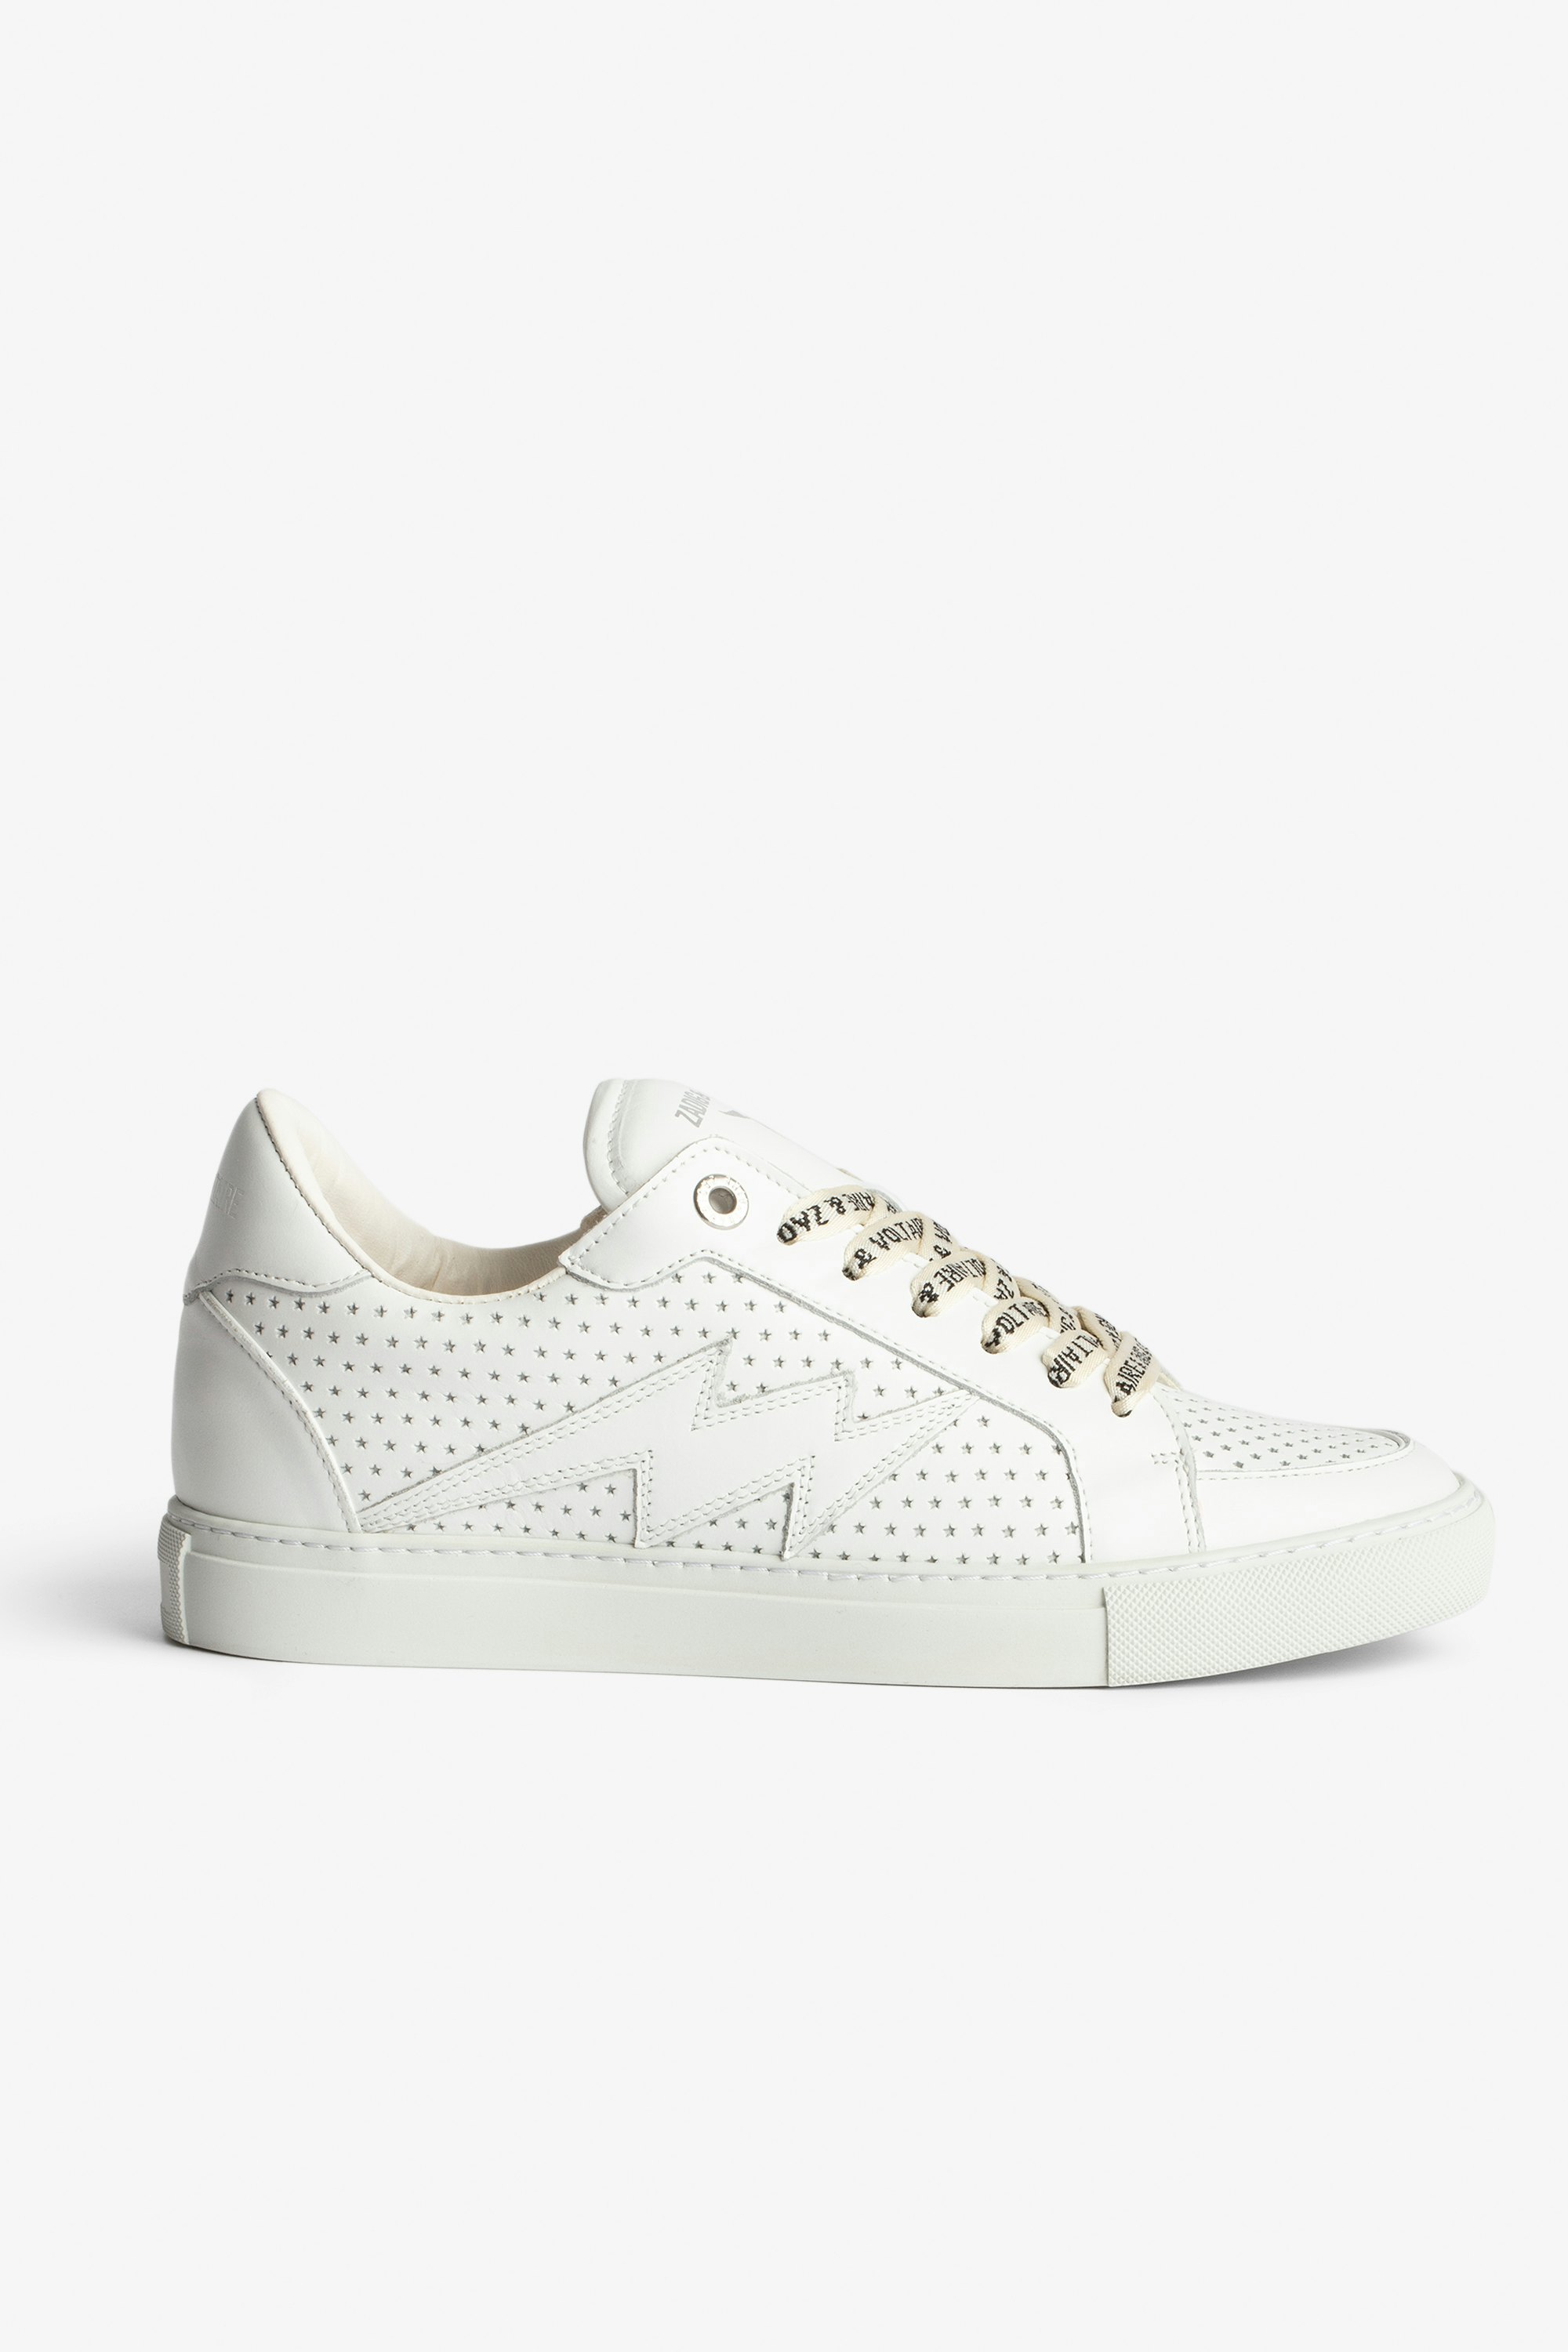 La Flash Smooth Sneakers - Women's low-top sneakers in smooth white leather with perforated stars